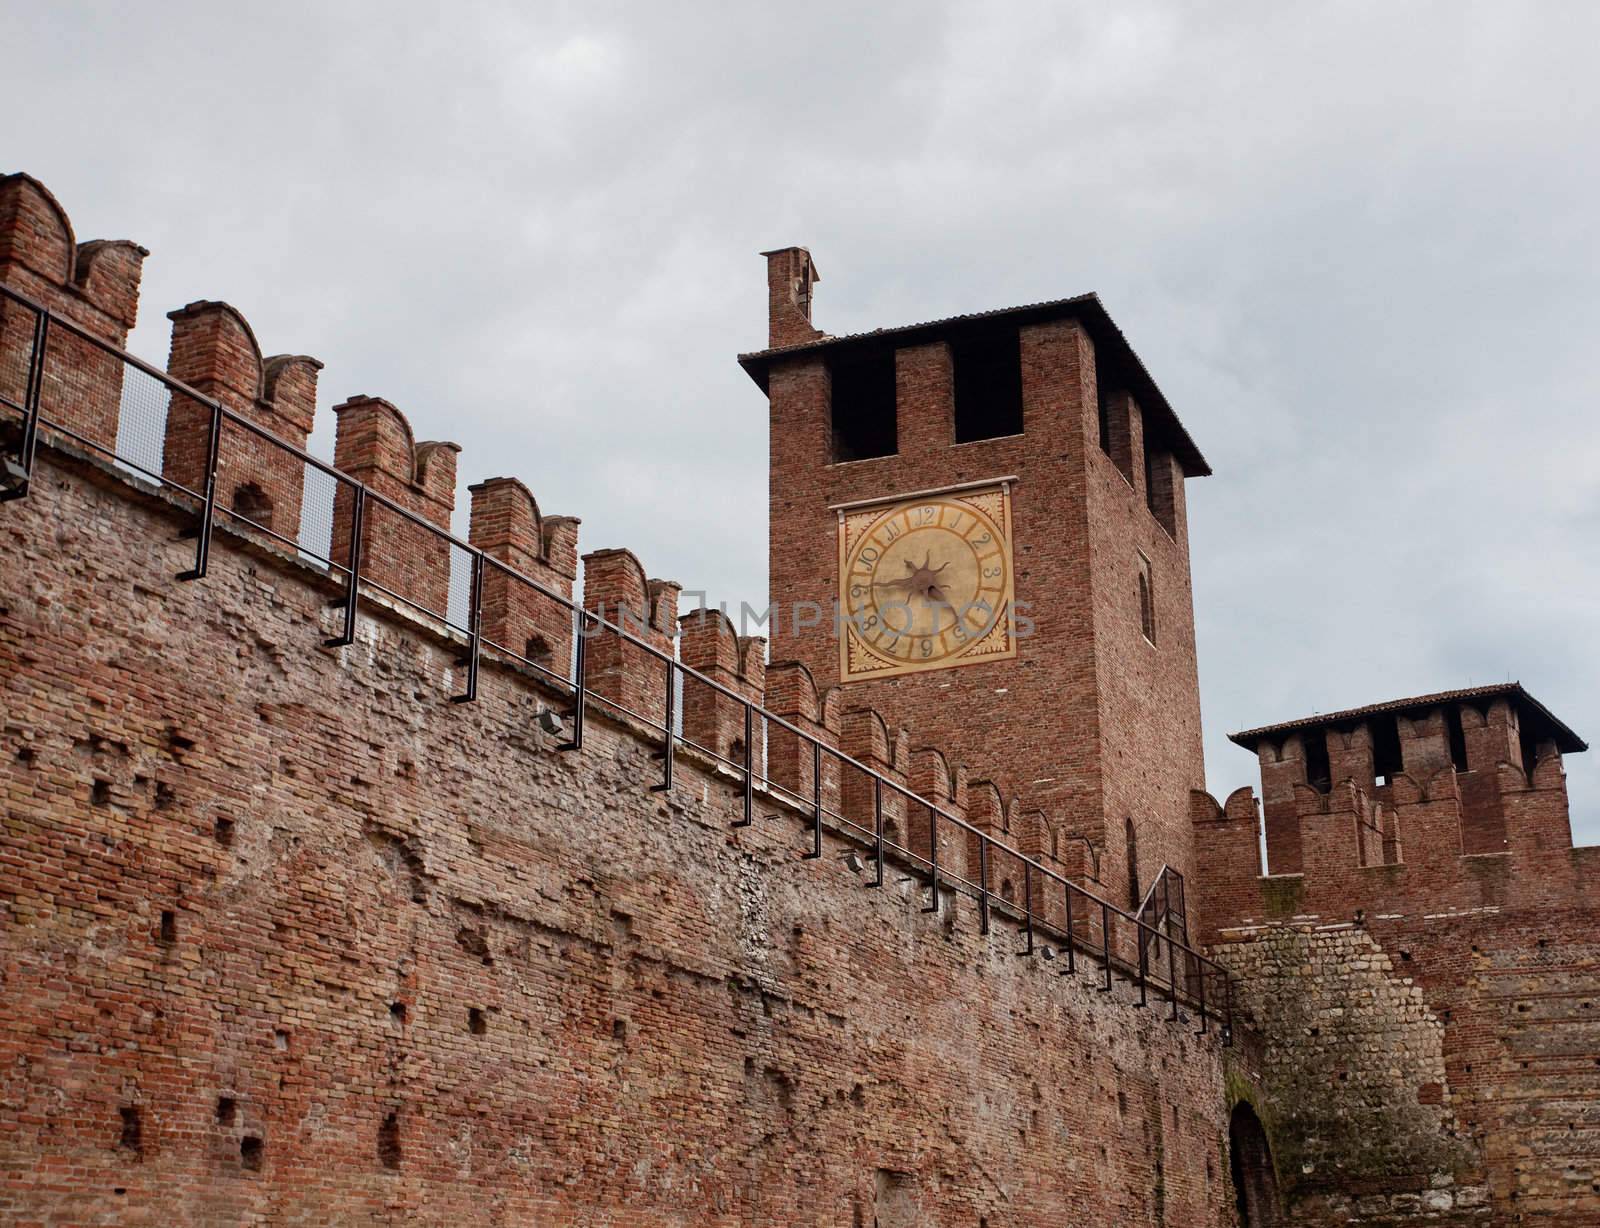 Castel Vecchio in Verona with battlements against the cloudy sky